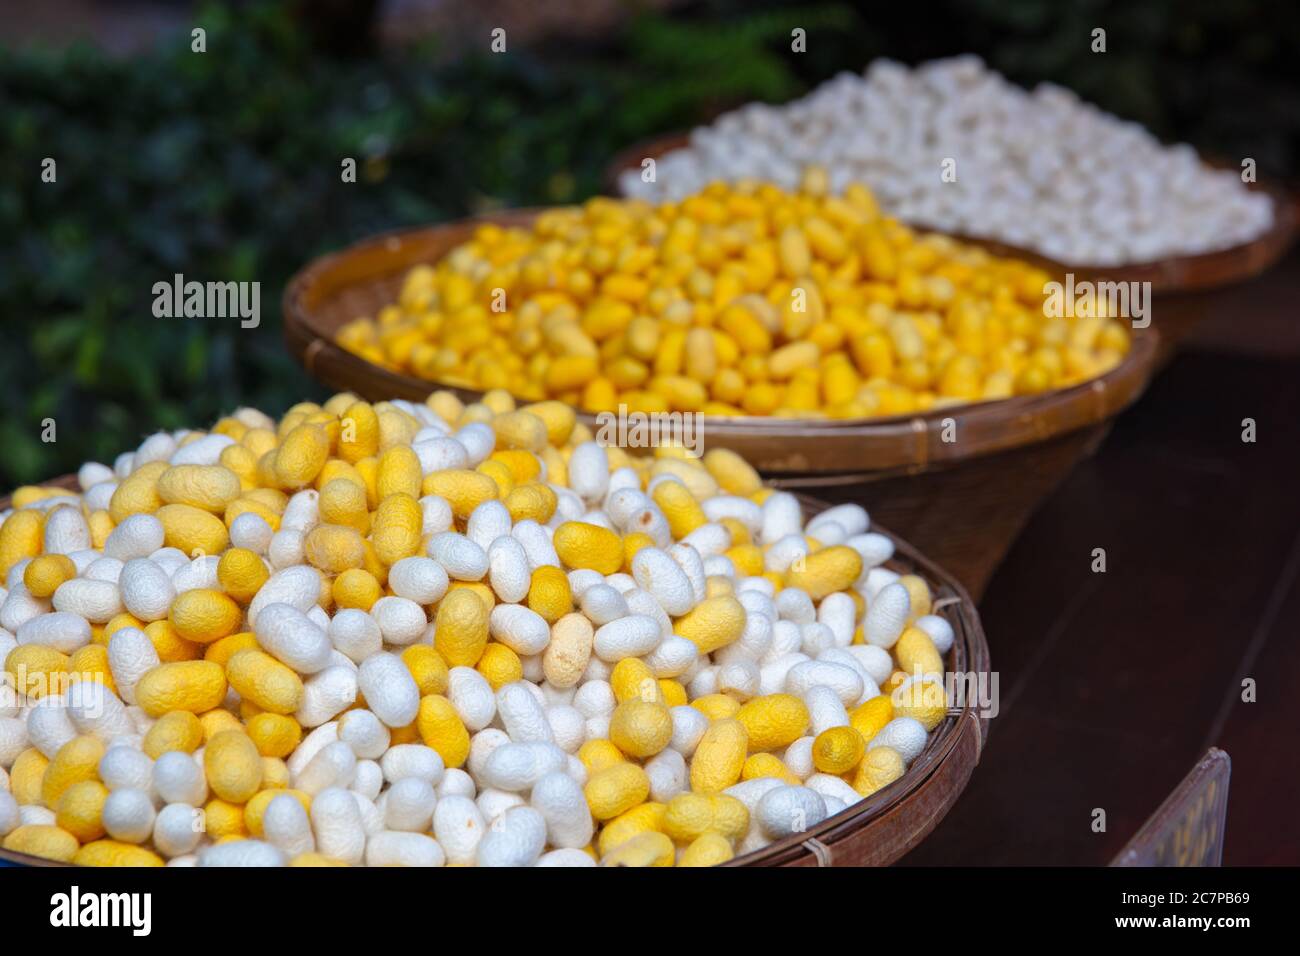 Yellow And White Silk Cocoons In Baskets Stock Photo